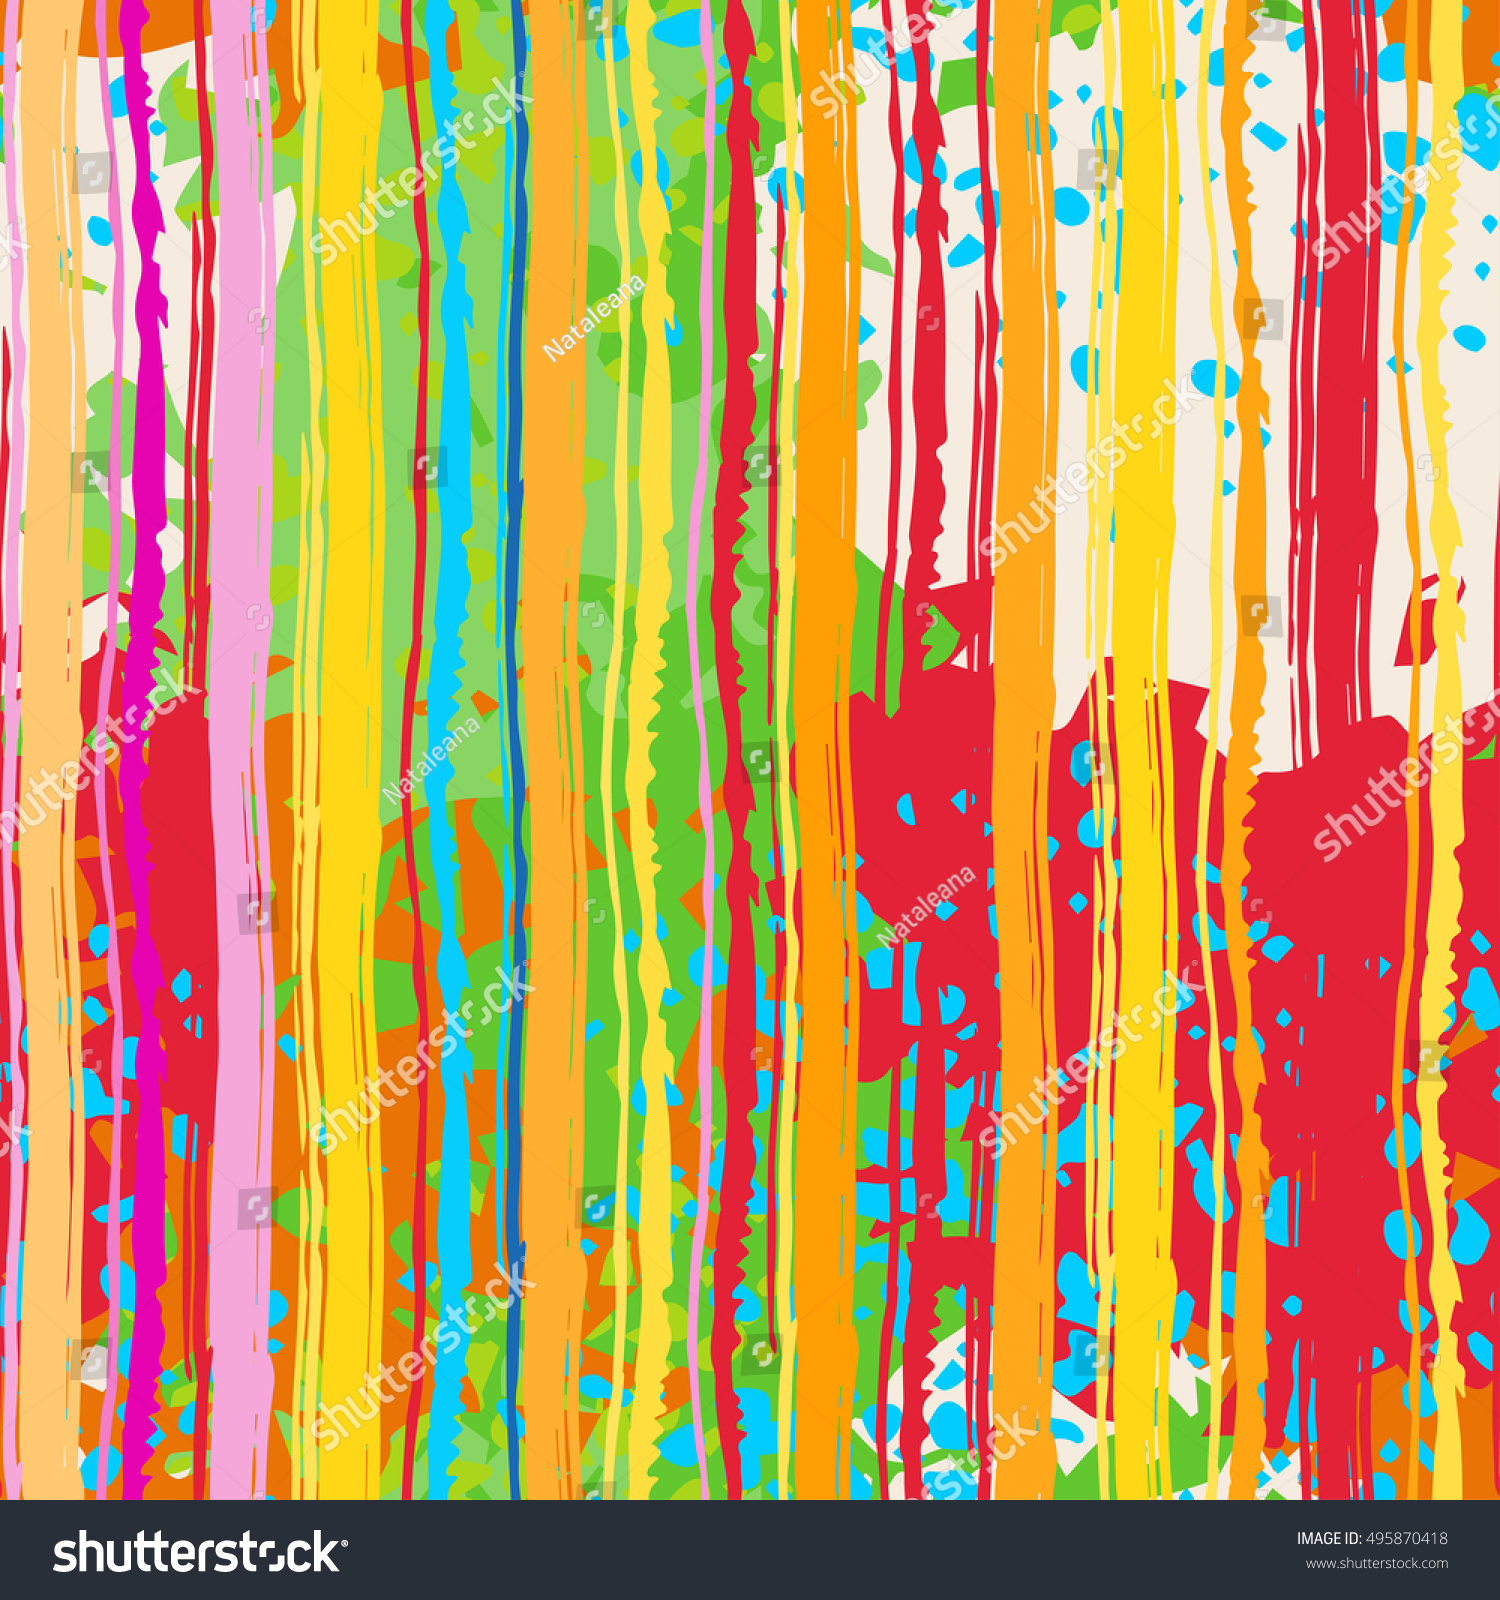 Abstract art grunge colorful seamless pattern, paint stains, watercolor, chaotic brush strokes. Background distressed texture, wallpaper, wrapping #495870418